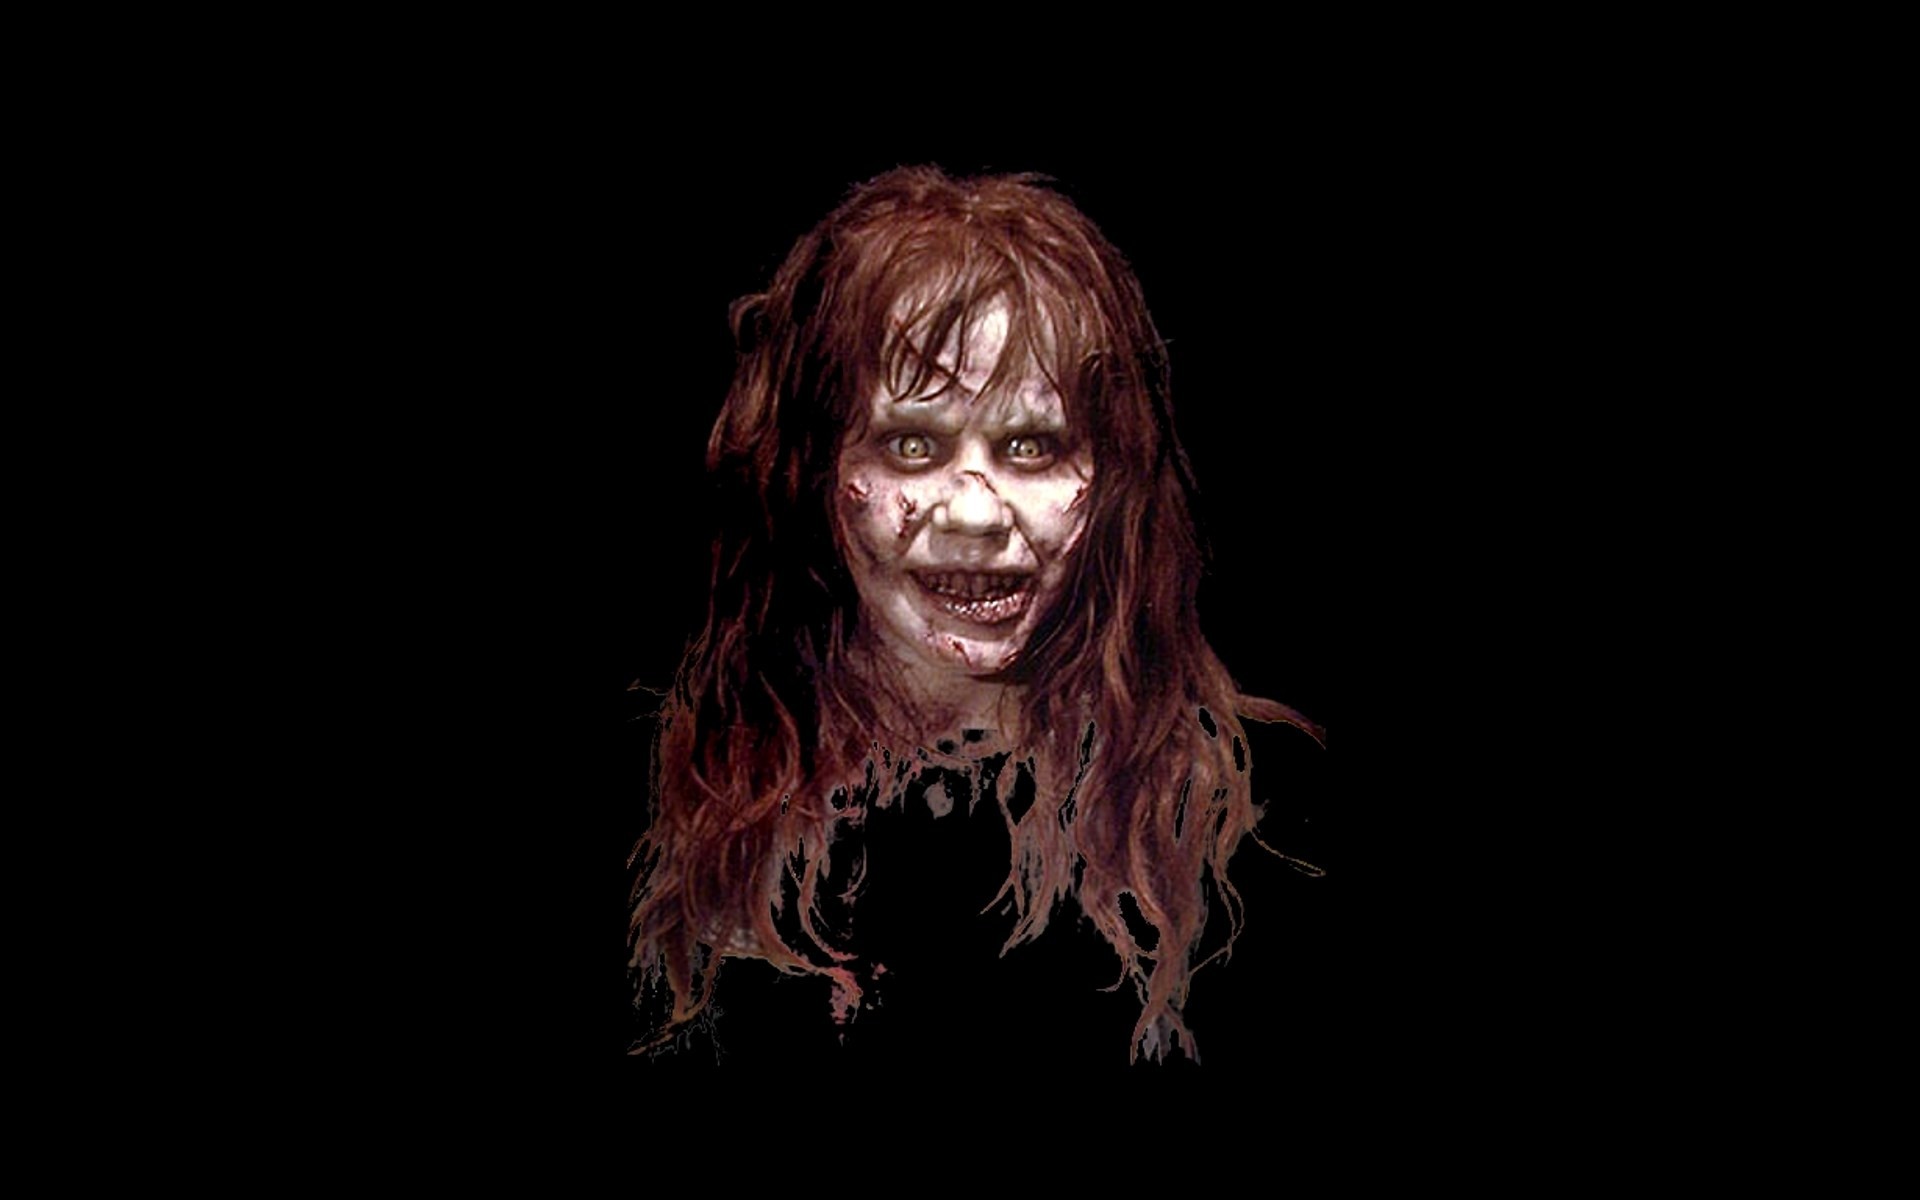 Windows Wallpaper The Exorcist By Lavar Nash Williams - Exorcist Scary Face Gif , HD Wallpaper & Backgrounds